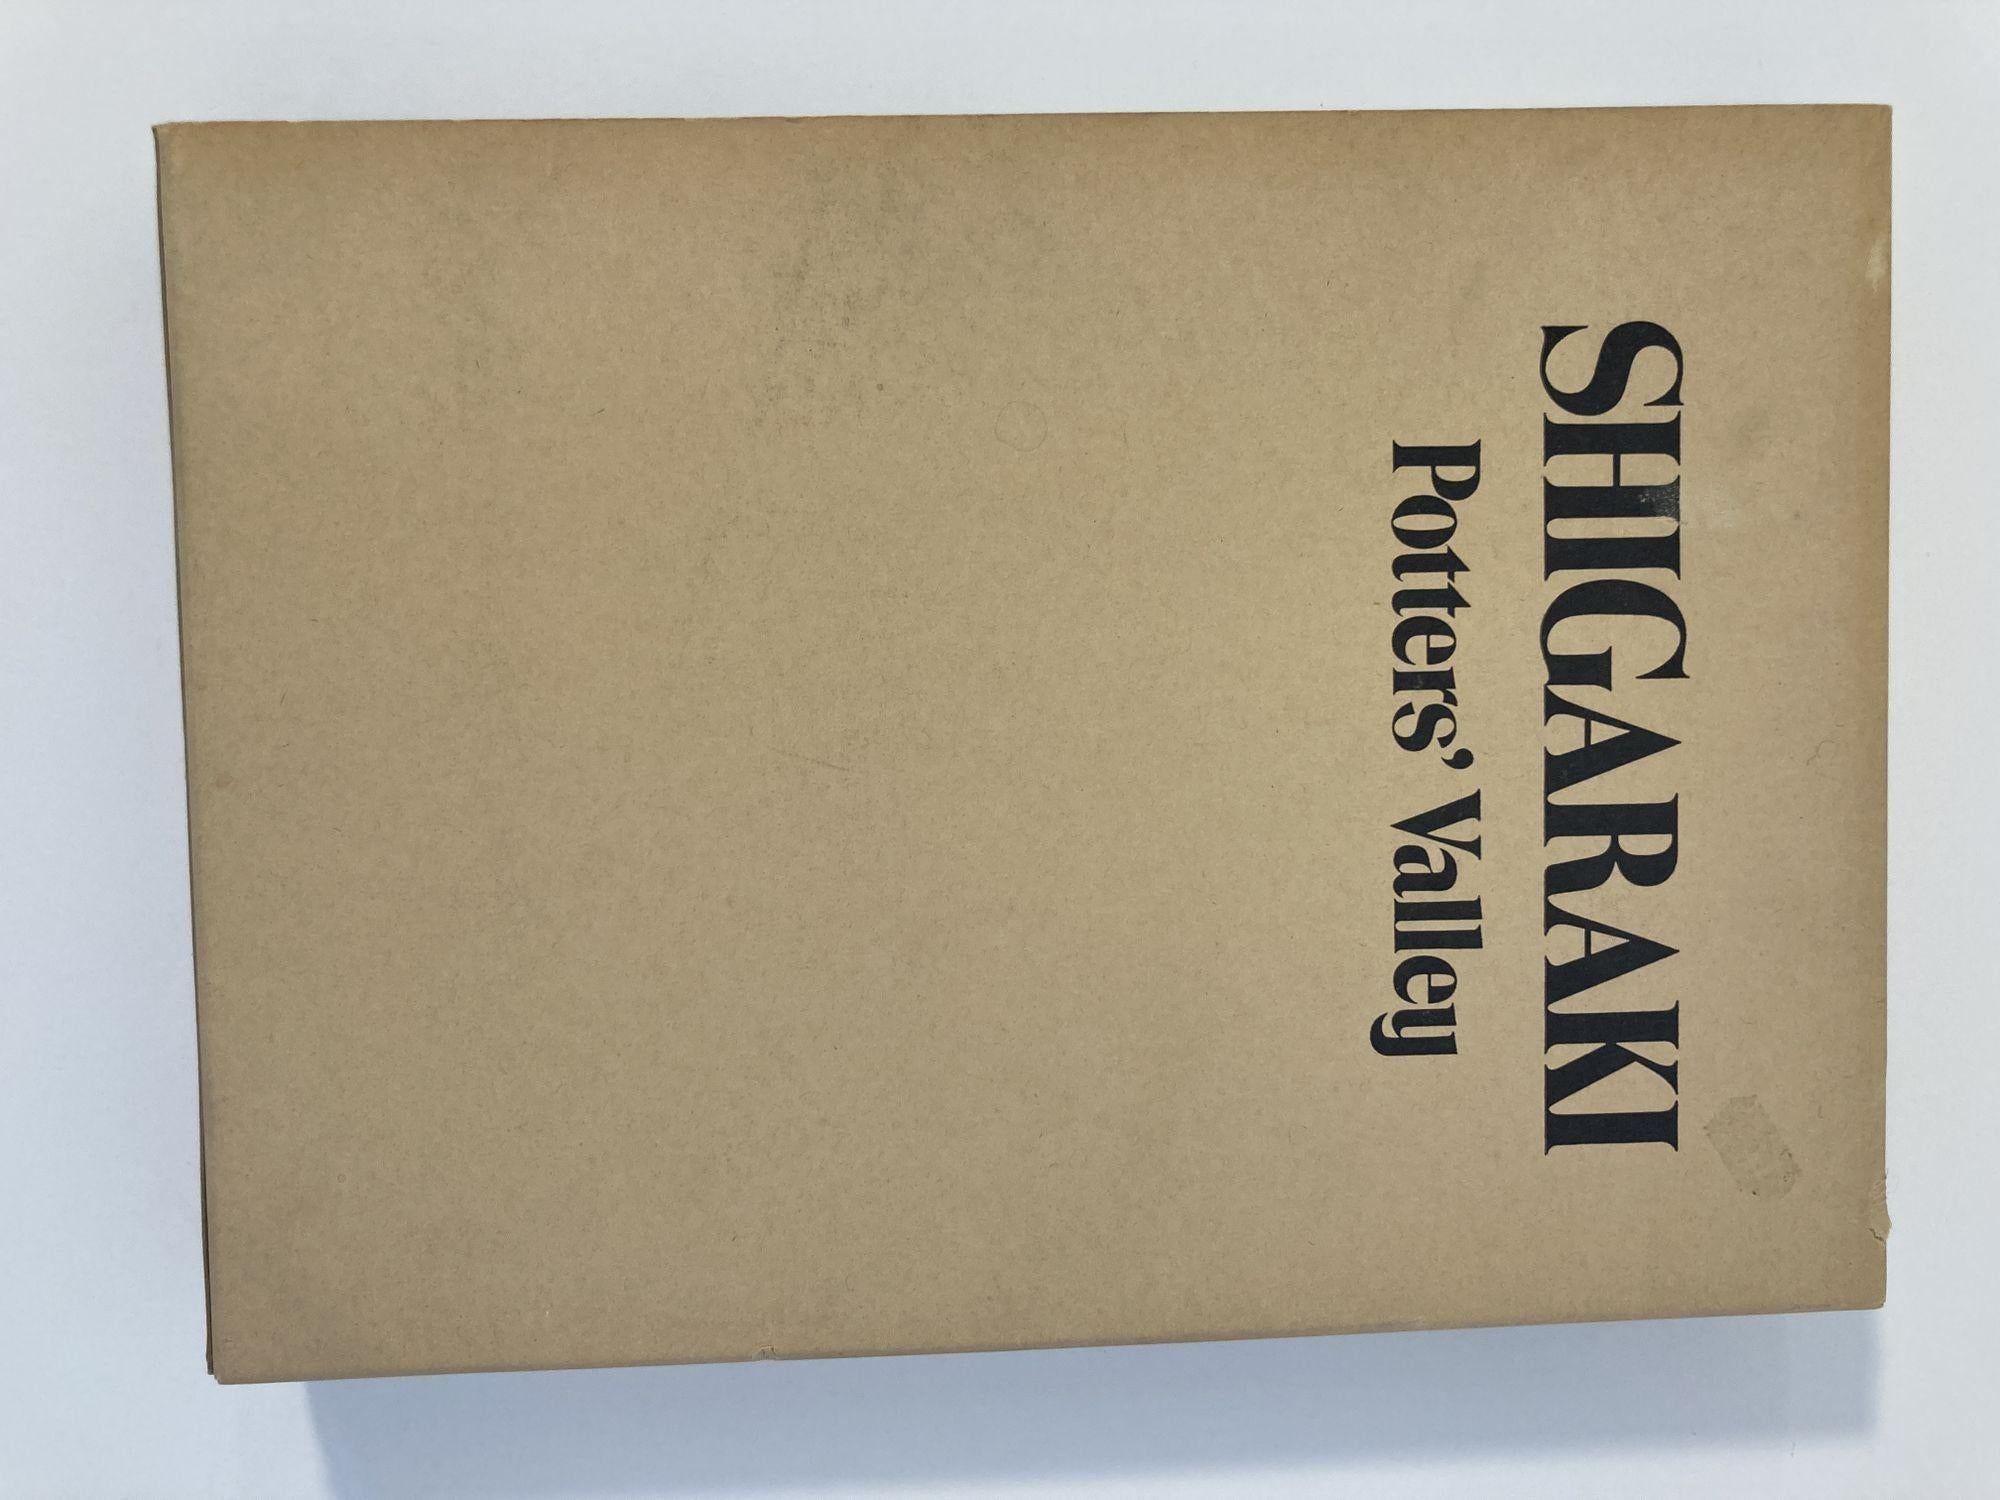 Shigaraki the potters valley 1st Edition 1979 Japan. by Louise Allison Cort.
This is a study of one of the most influential ceramic traditions to emerge from Japan. It details the site of Shigaraki, its valuable wares and the potters who produced